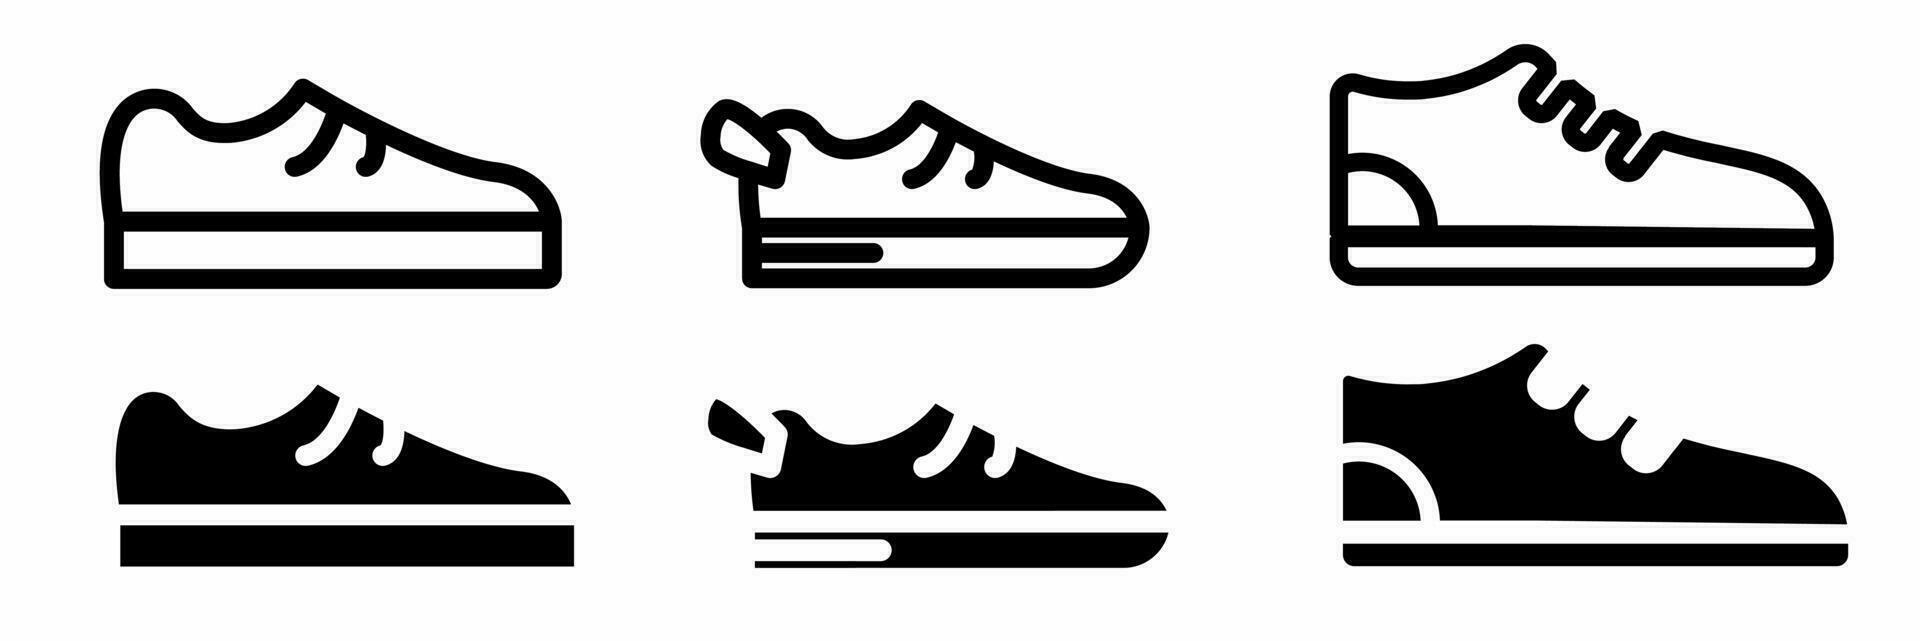 Shoe icon set. Shoes black and white illustration. Stock vector. vector